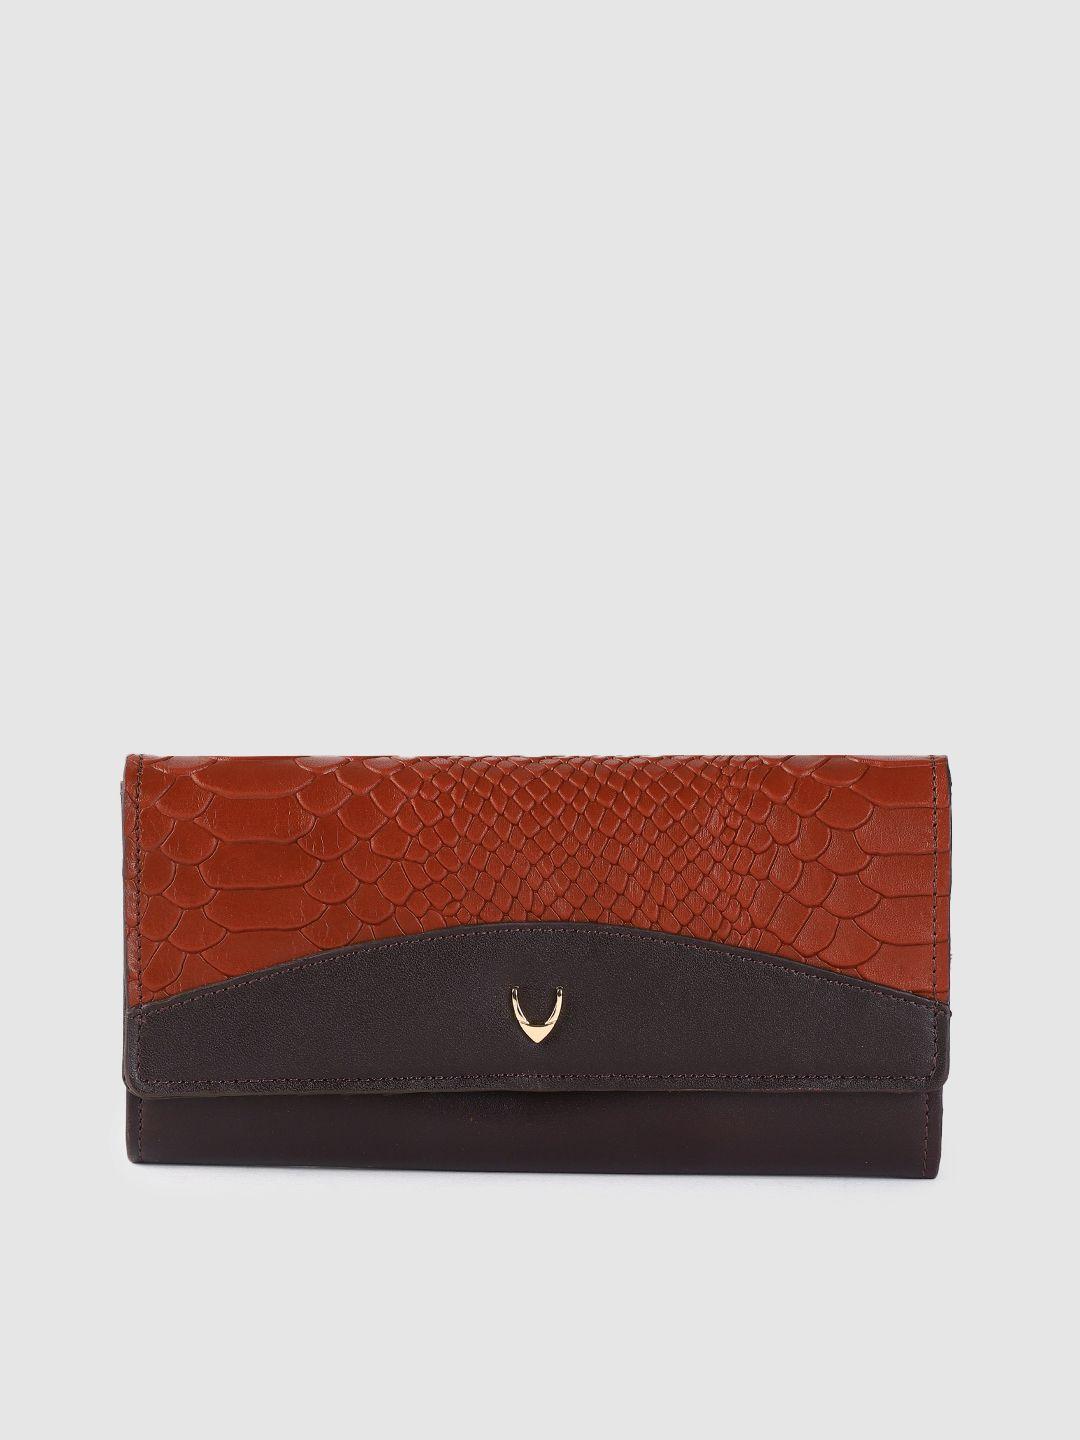 hidesign women red & brown textured leather three fold wallet